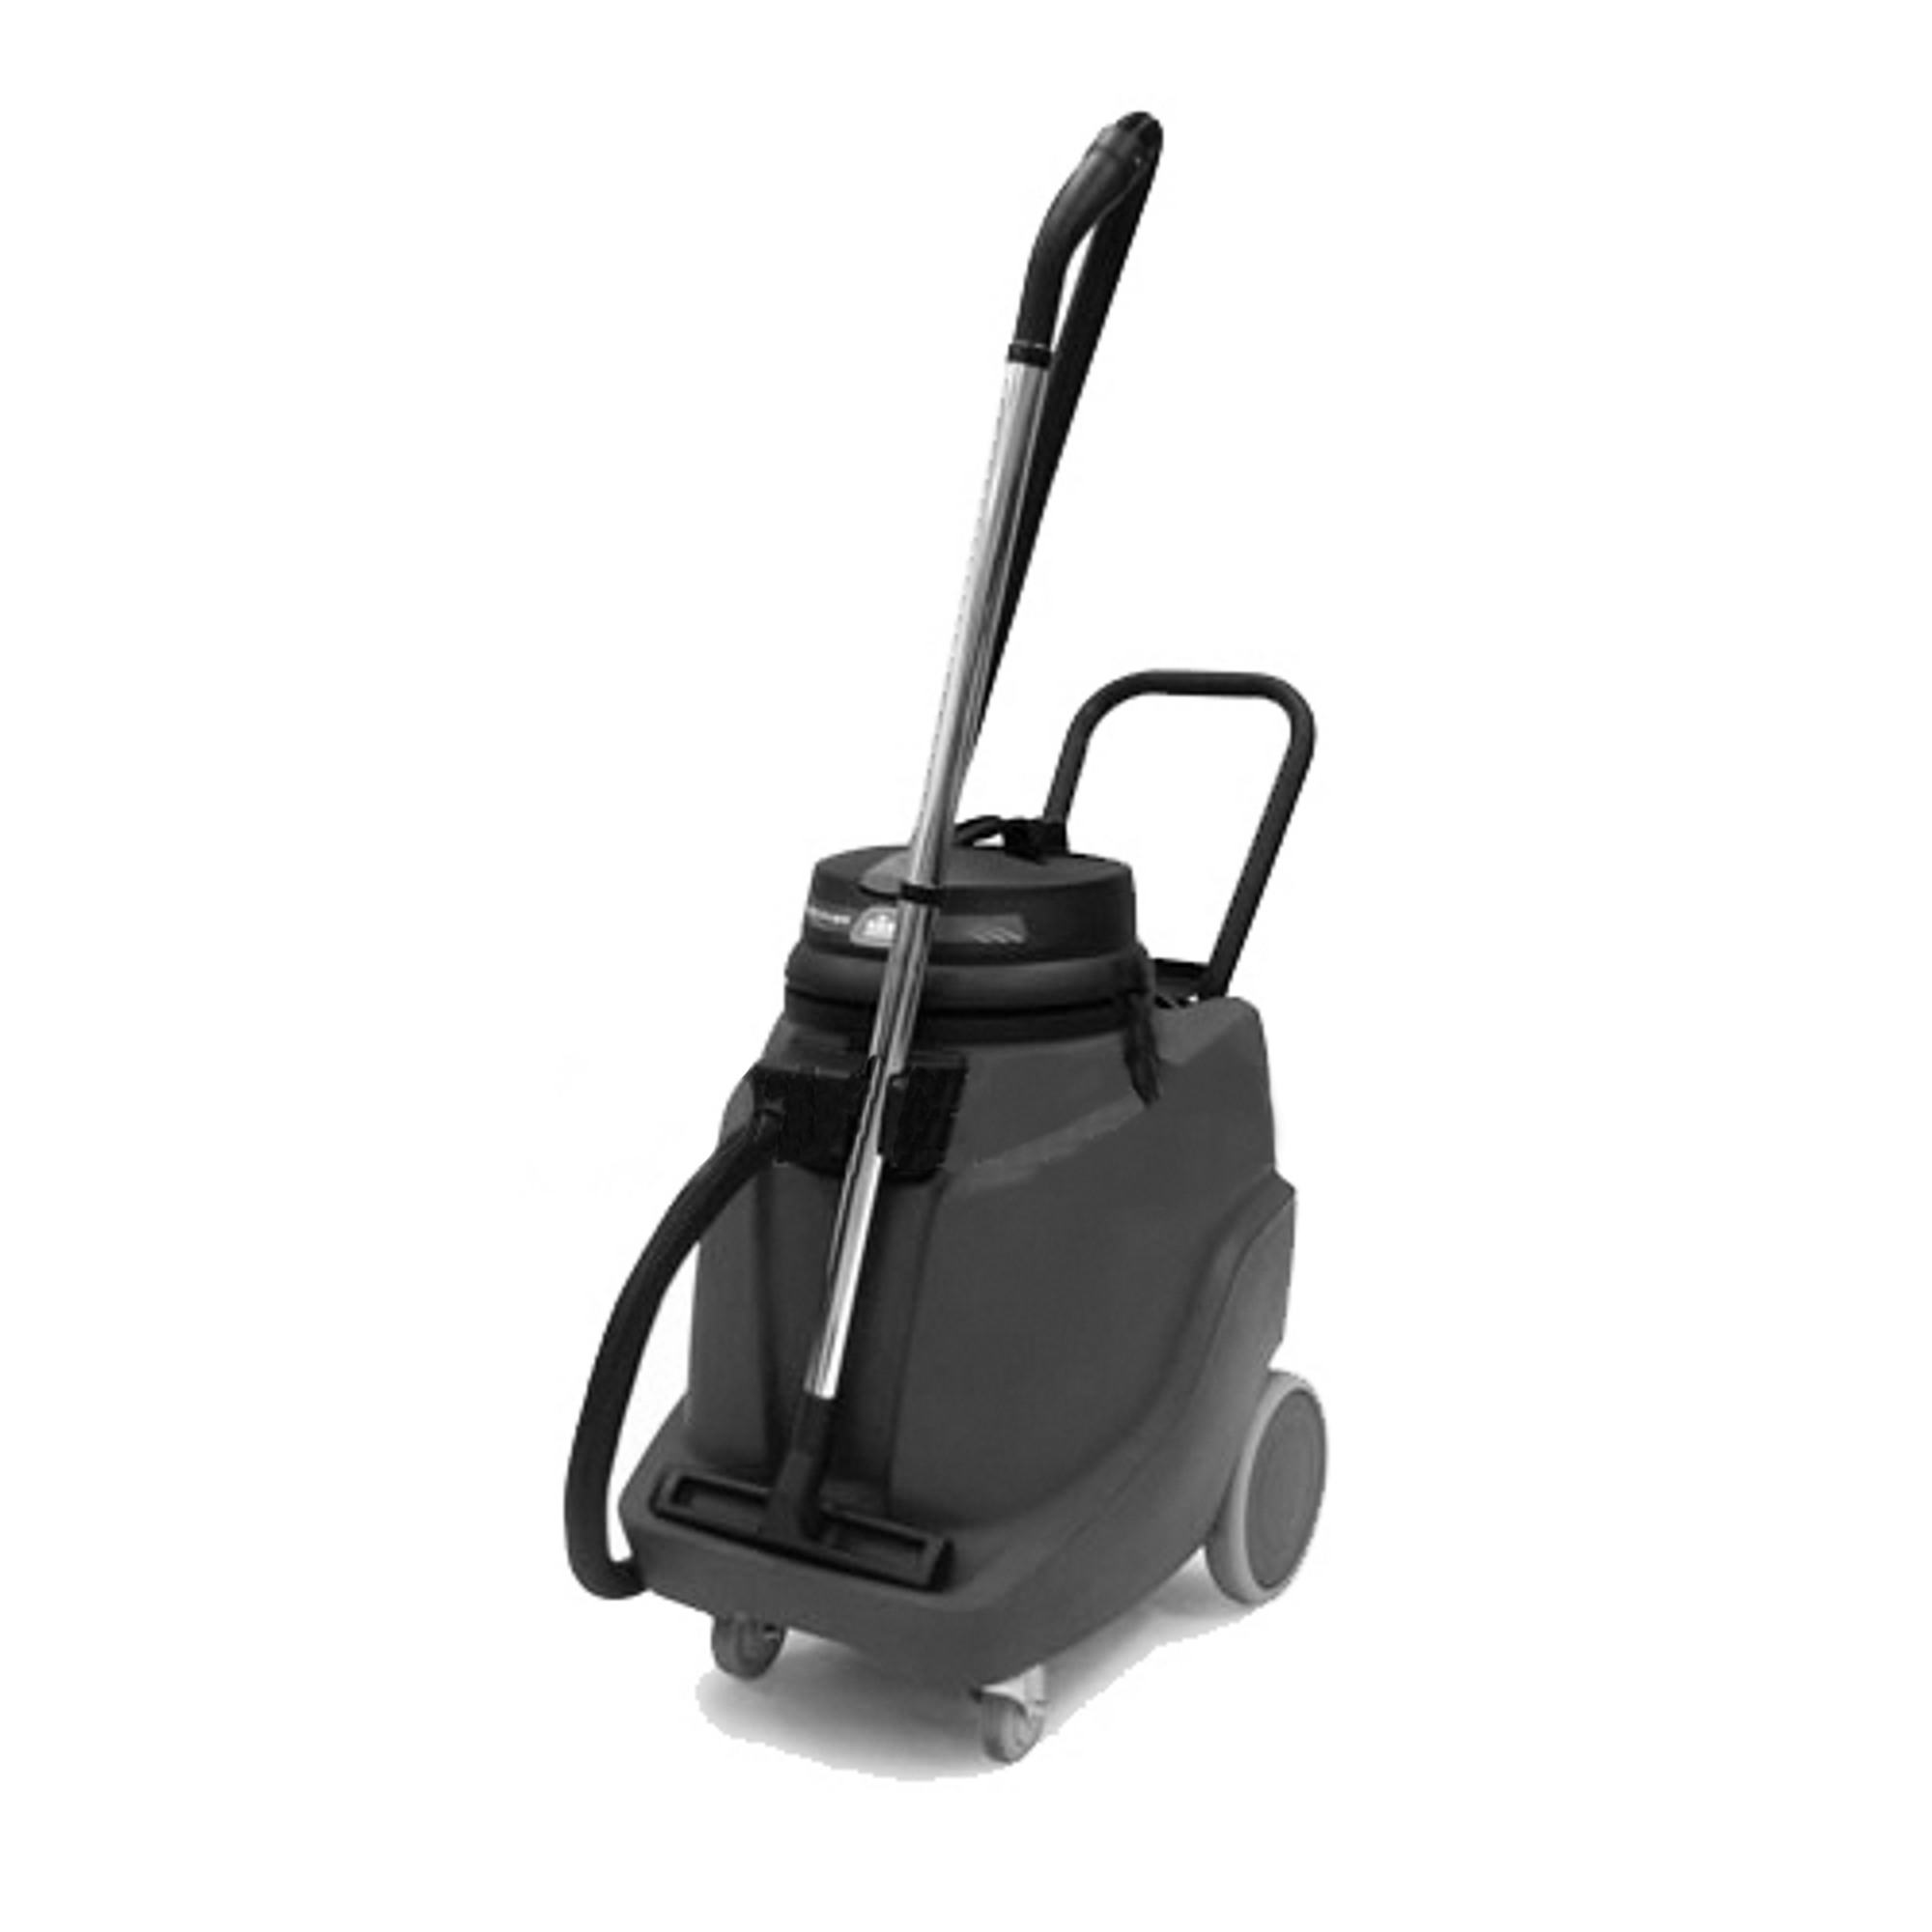 NT 68/1, 18-GALLON WET/DRY VACUUM WITH TOOLS, NO SQUEEGEE